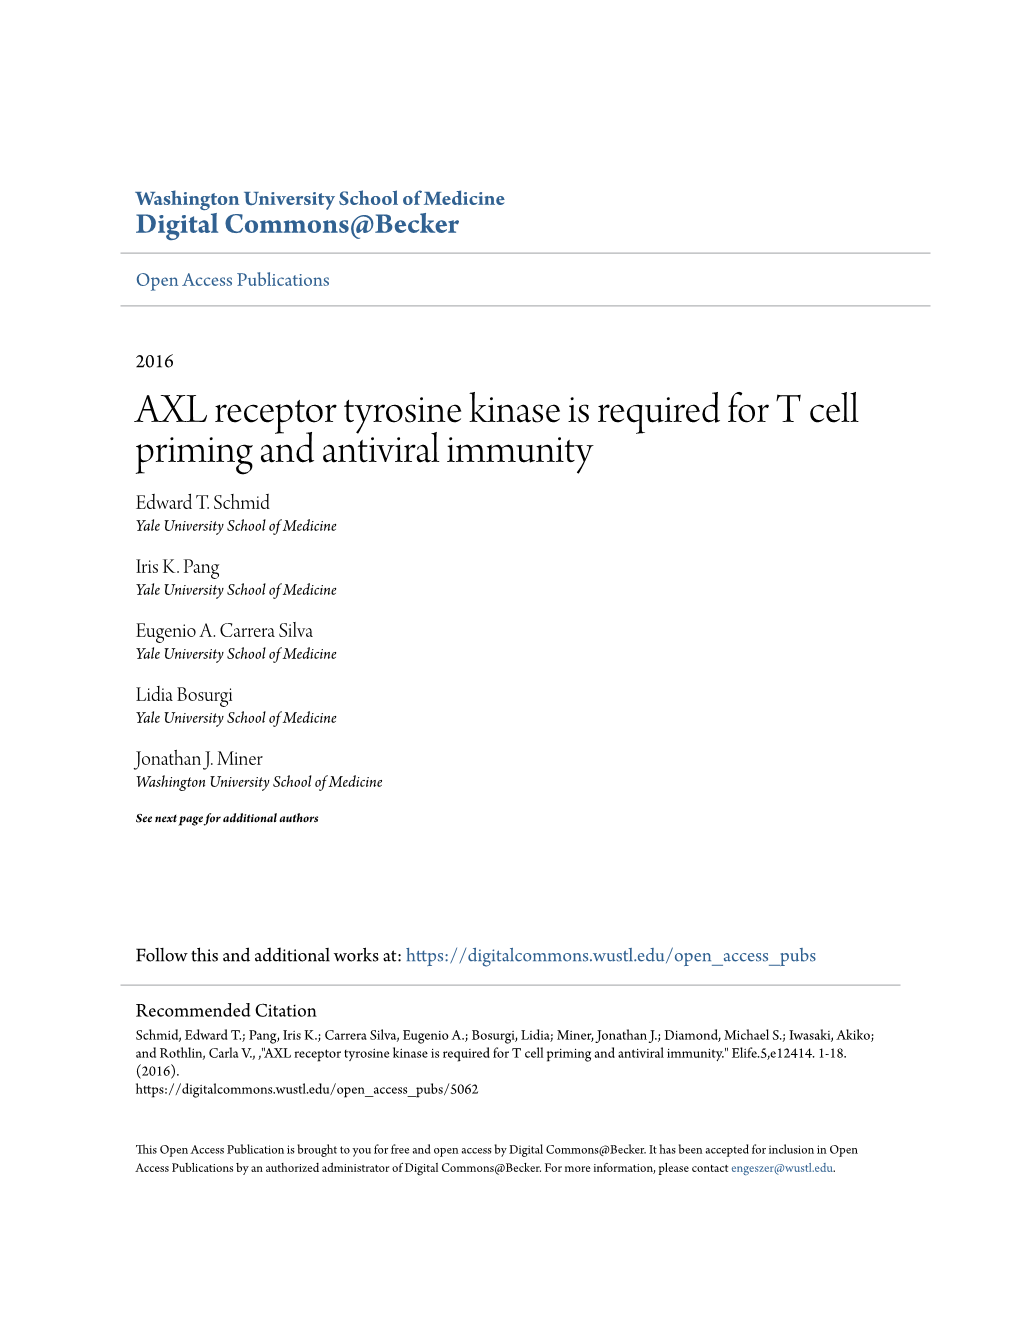 AXL Receptor Tyrosine Kinase Is Required for T Cell Priming and Antiviral Immunity Edward T